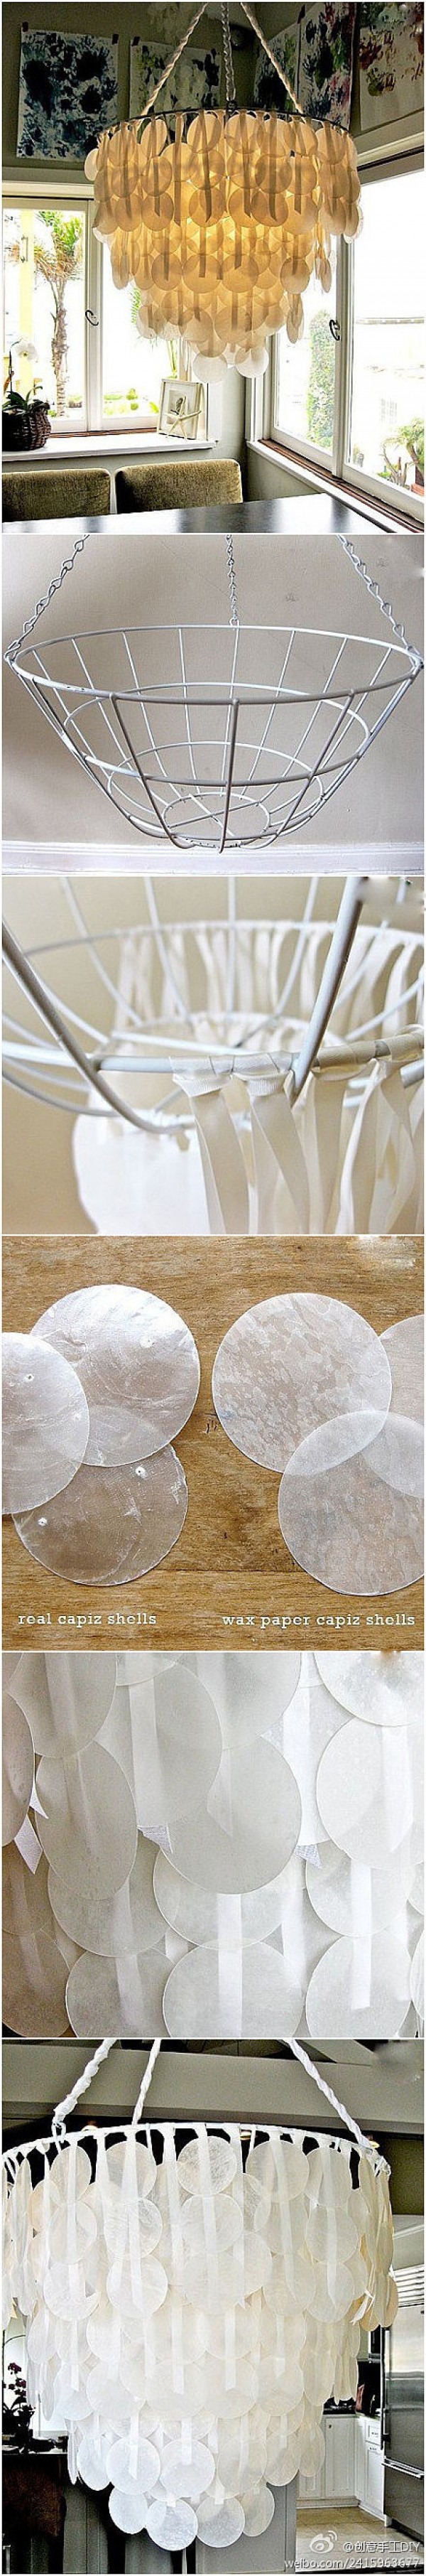 Check out how to make an easy DIY capiz shell chandelier from wax paper